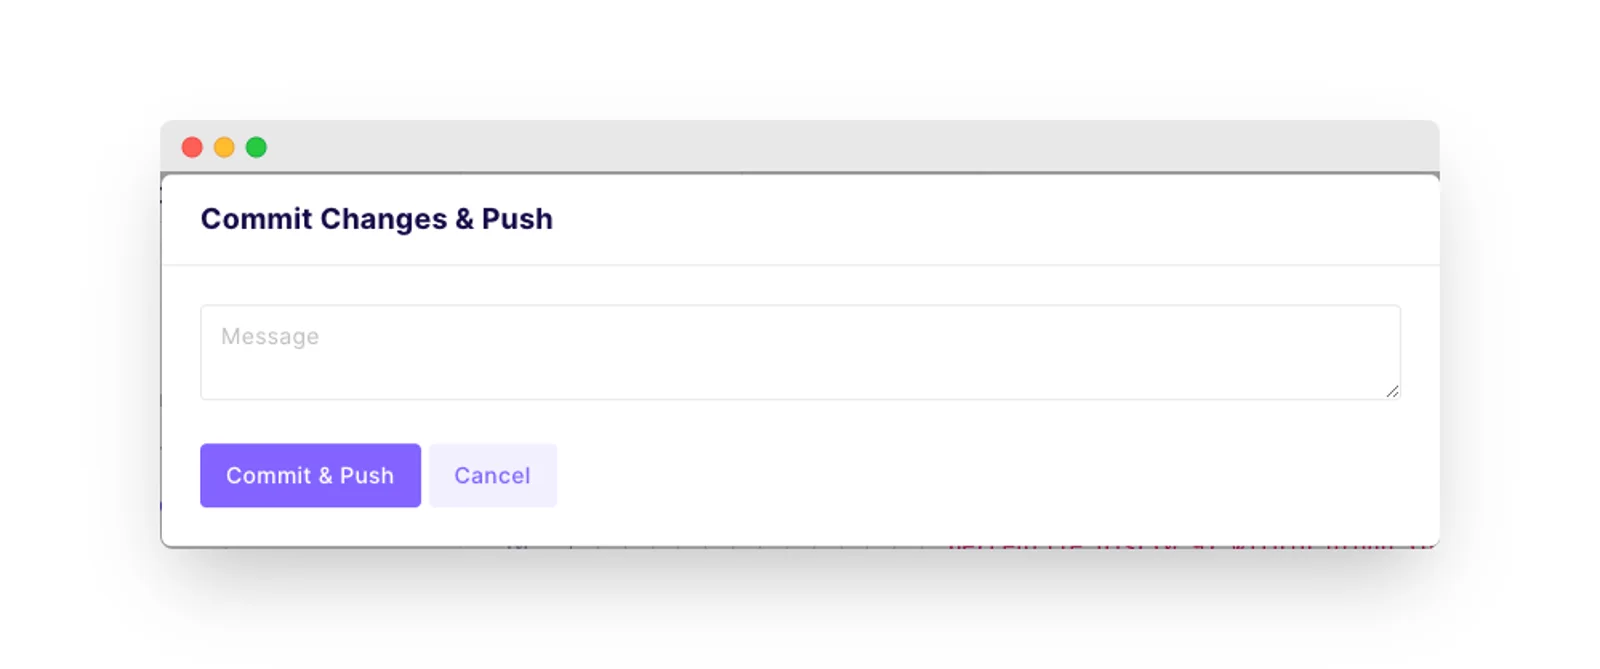 An empty “Commit Changes & Push” view.